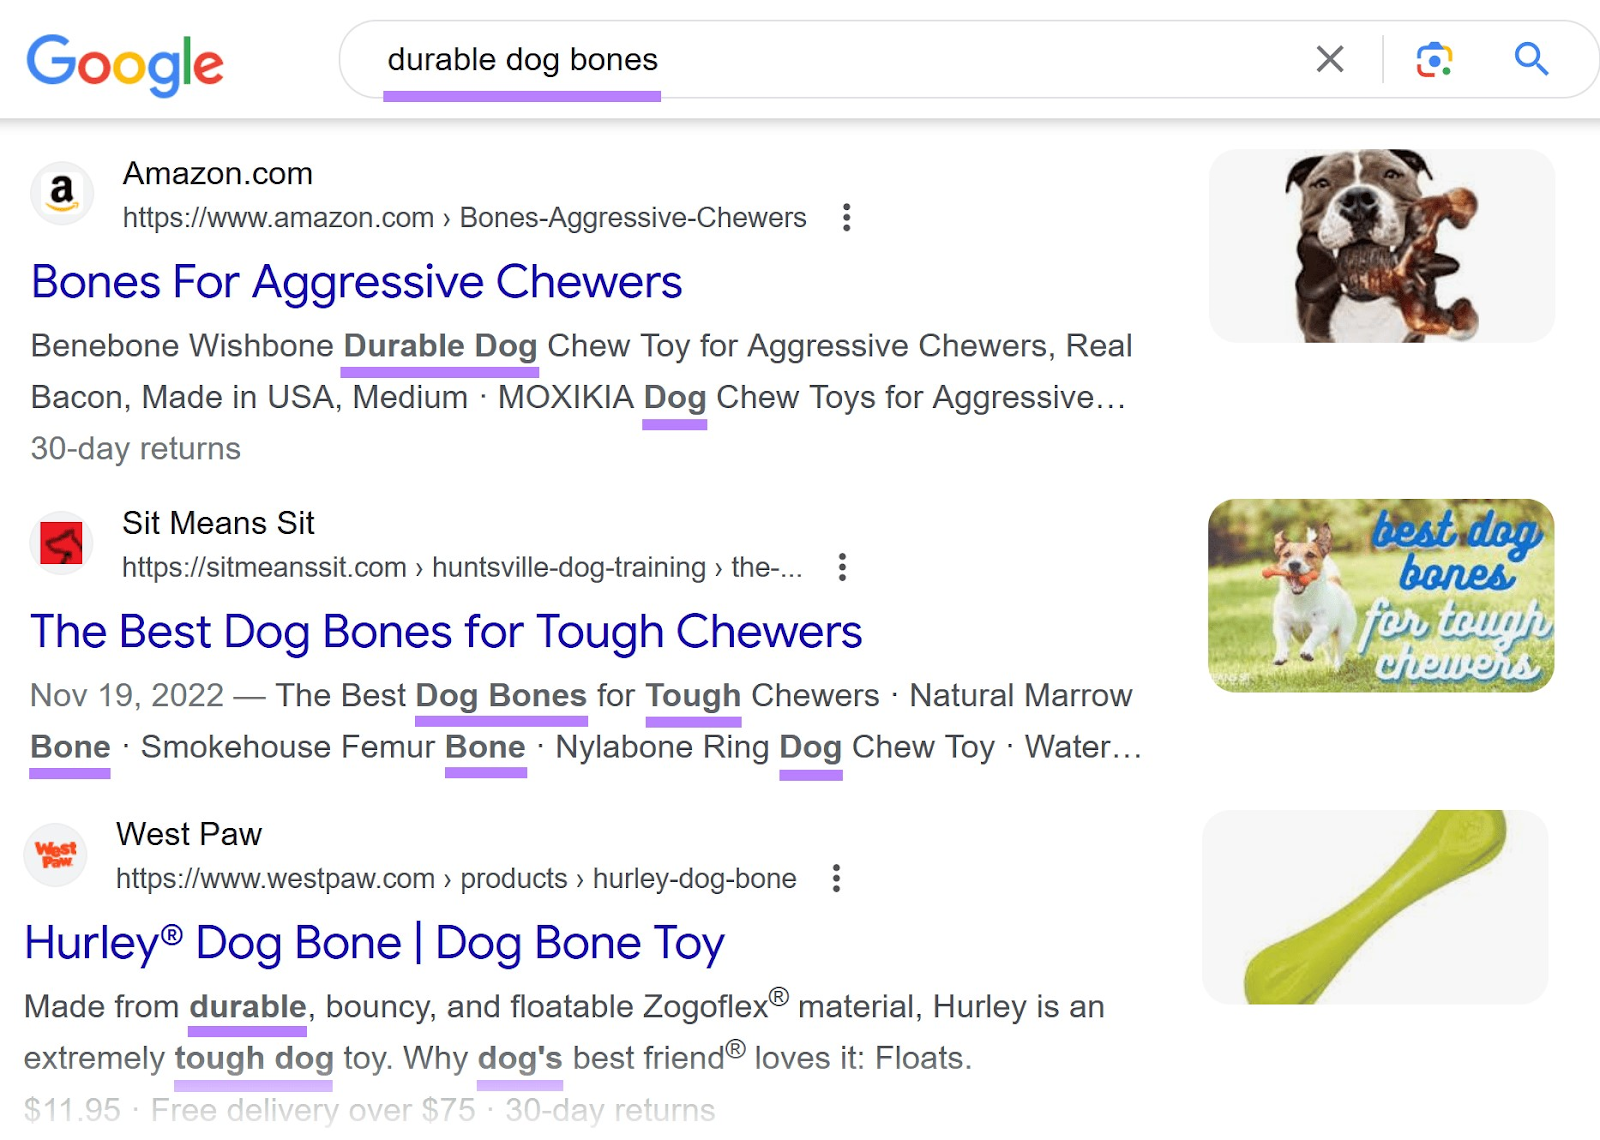 Google search results for “durable dog bones” with keywords highlighted